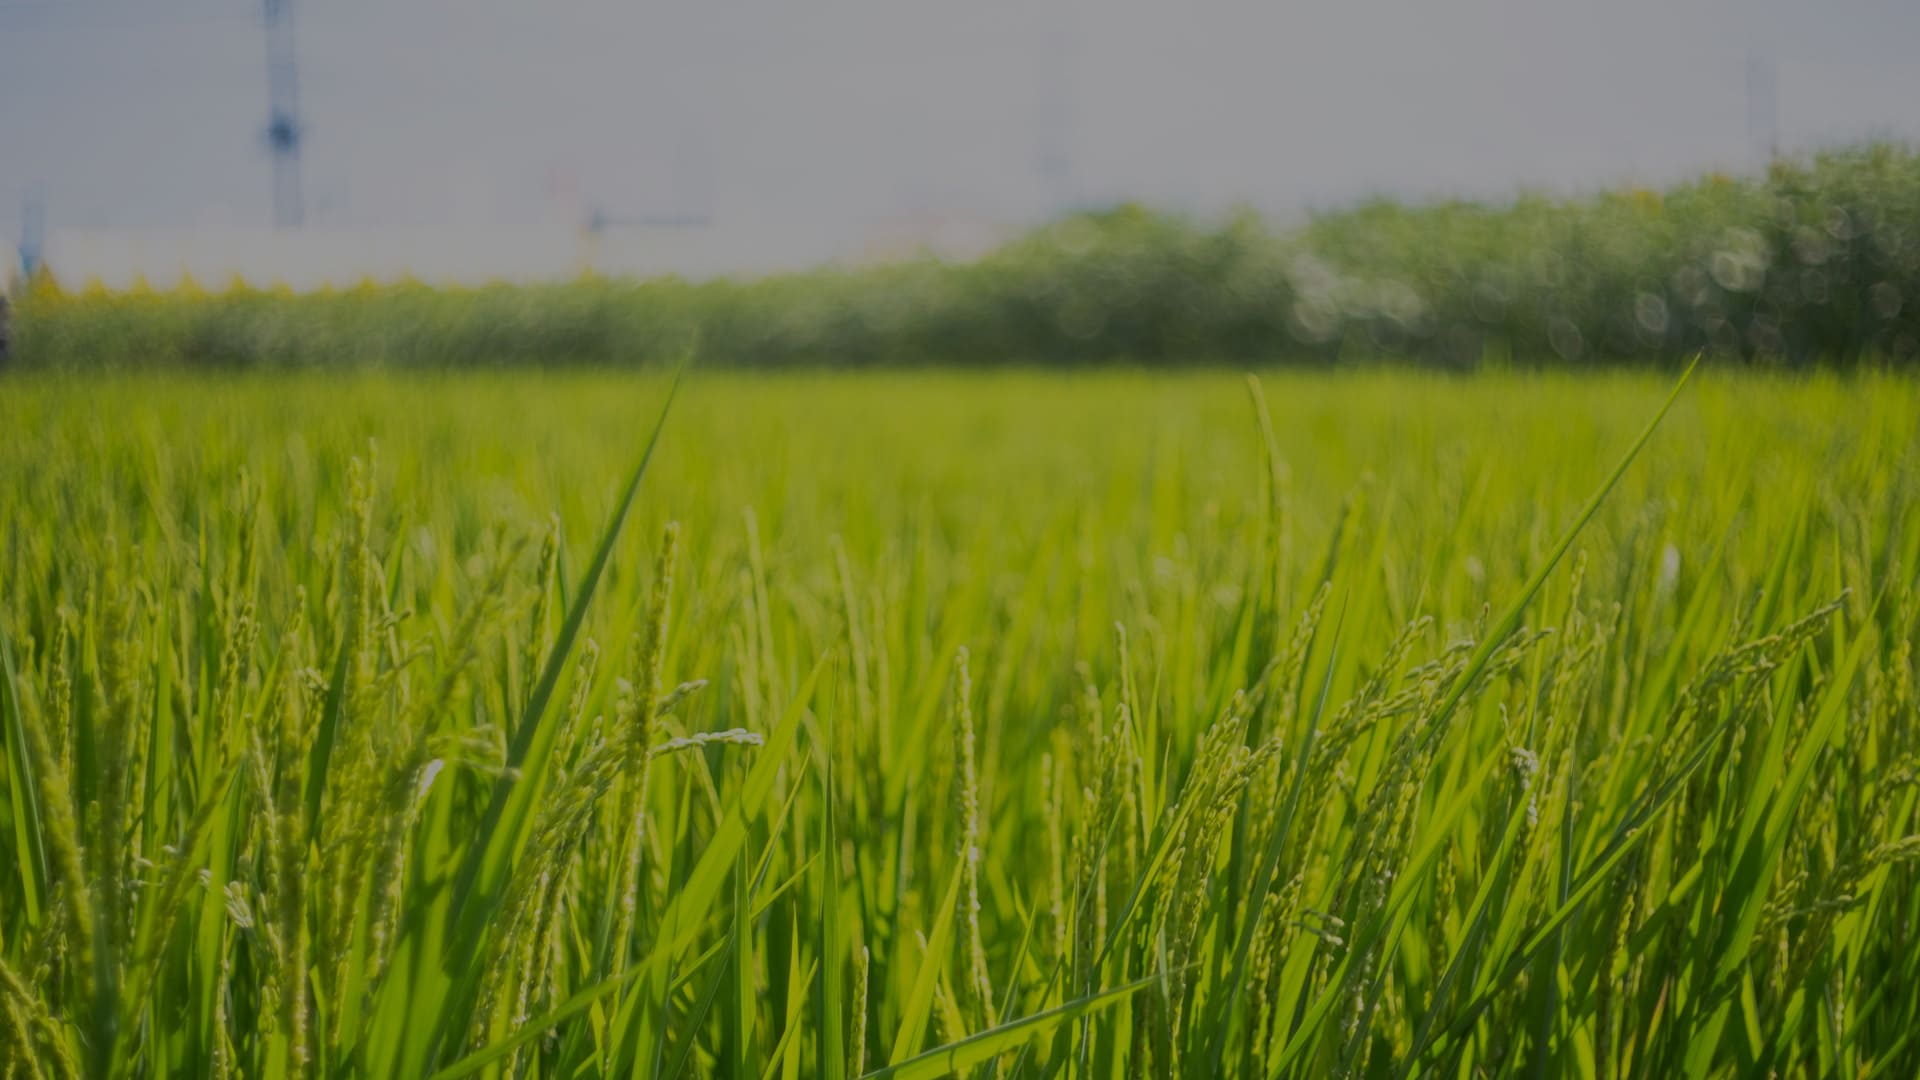 ”IoTと稲作効率化による持続可能な農業の実現”のイメージ画像 / Image of ”Achieving Sustainable Agriculture through IoT and Rice Efficiency”